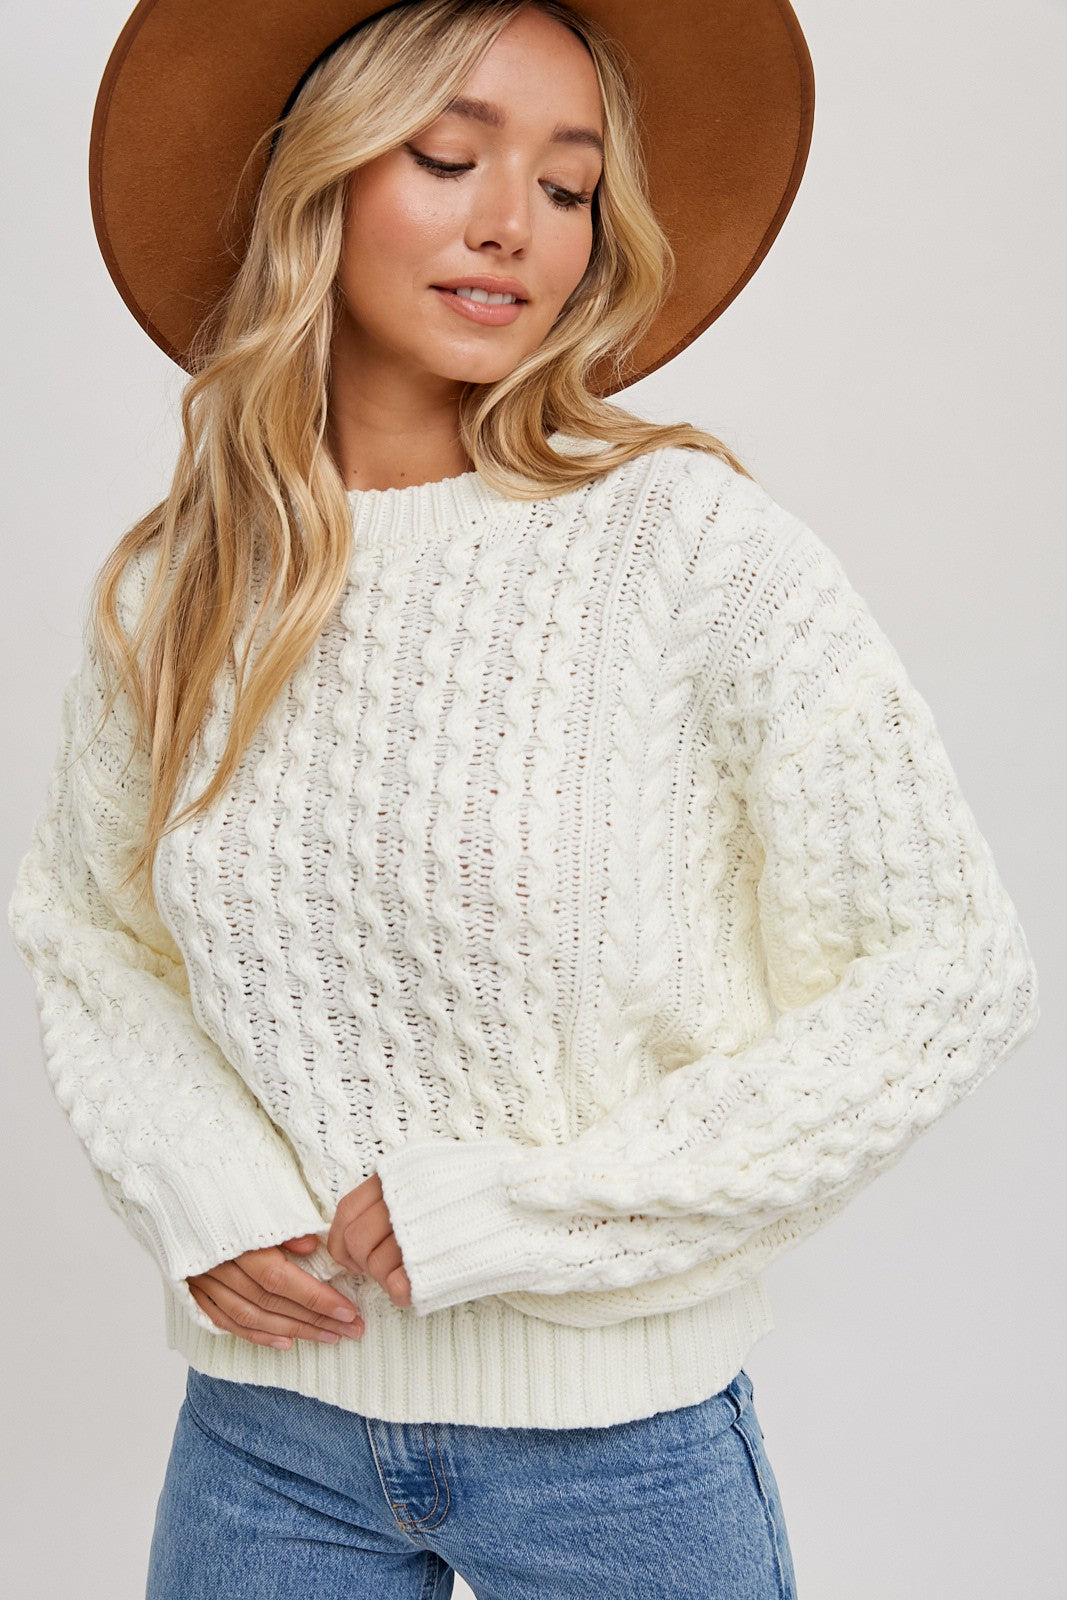 Monty Sweater (2 colors)